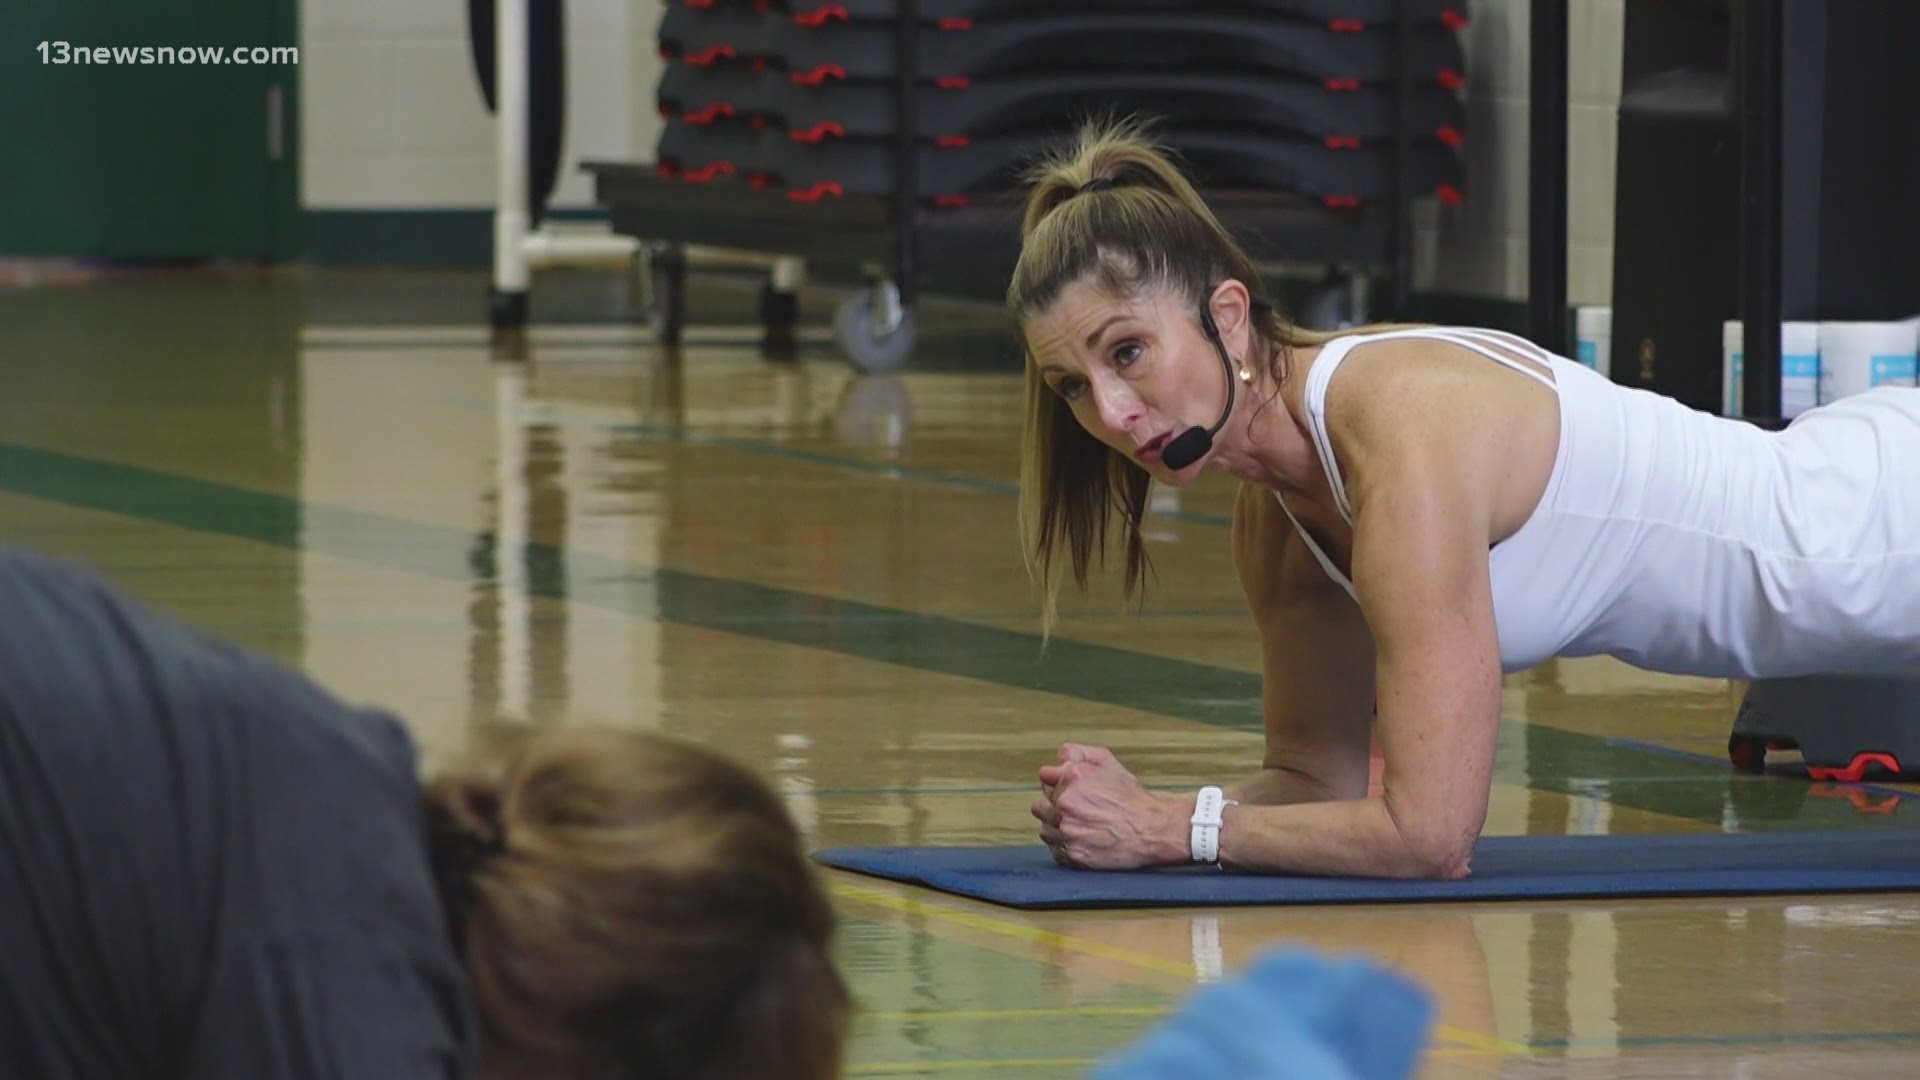 13News Now Ali Weatherton stopped by a recreation center to see how workout instructors are motivating people to keep their workout resolutions during COVID-19.